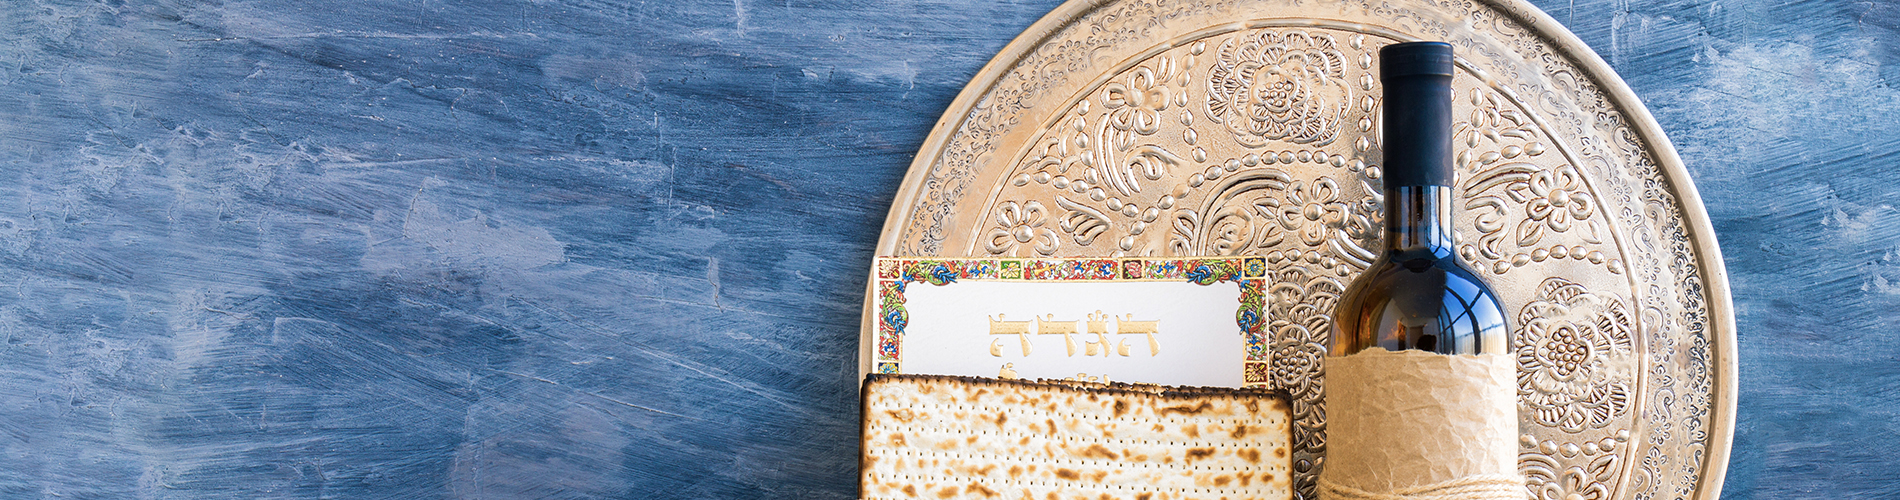 Metal plate with matzah or matza and Passover Haggadah on a vintage wood background presented as a Passover seder feast or meal.